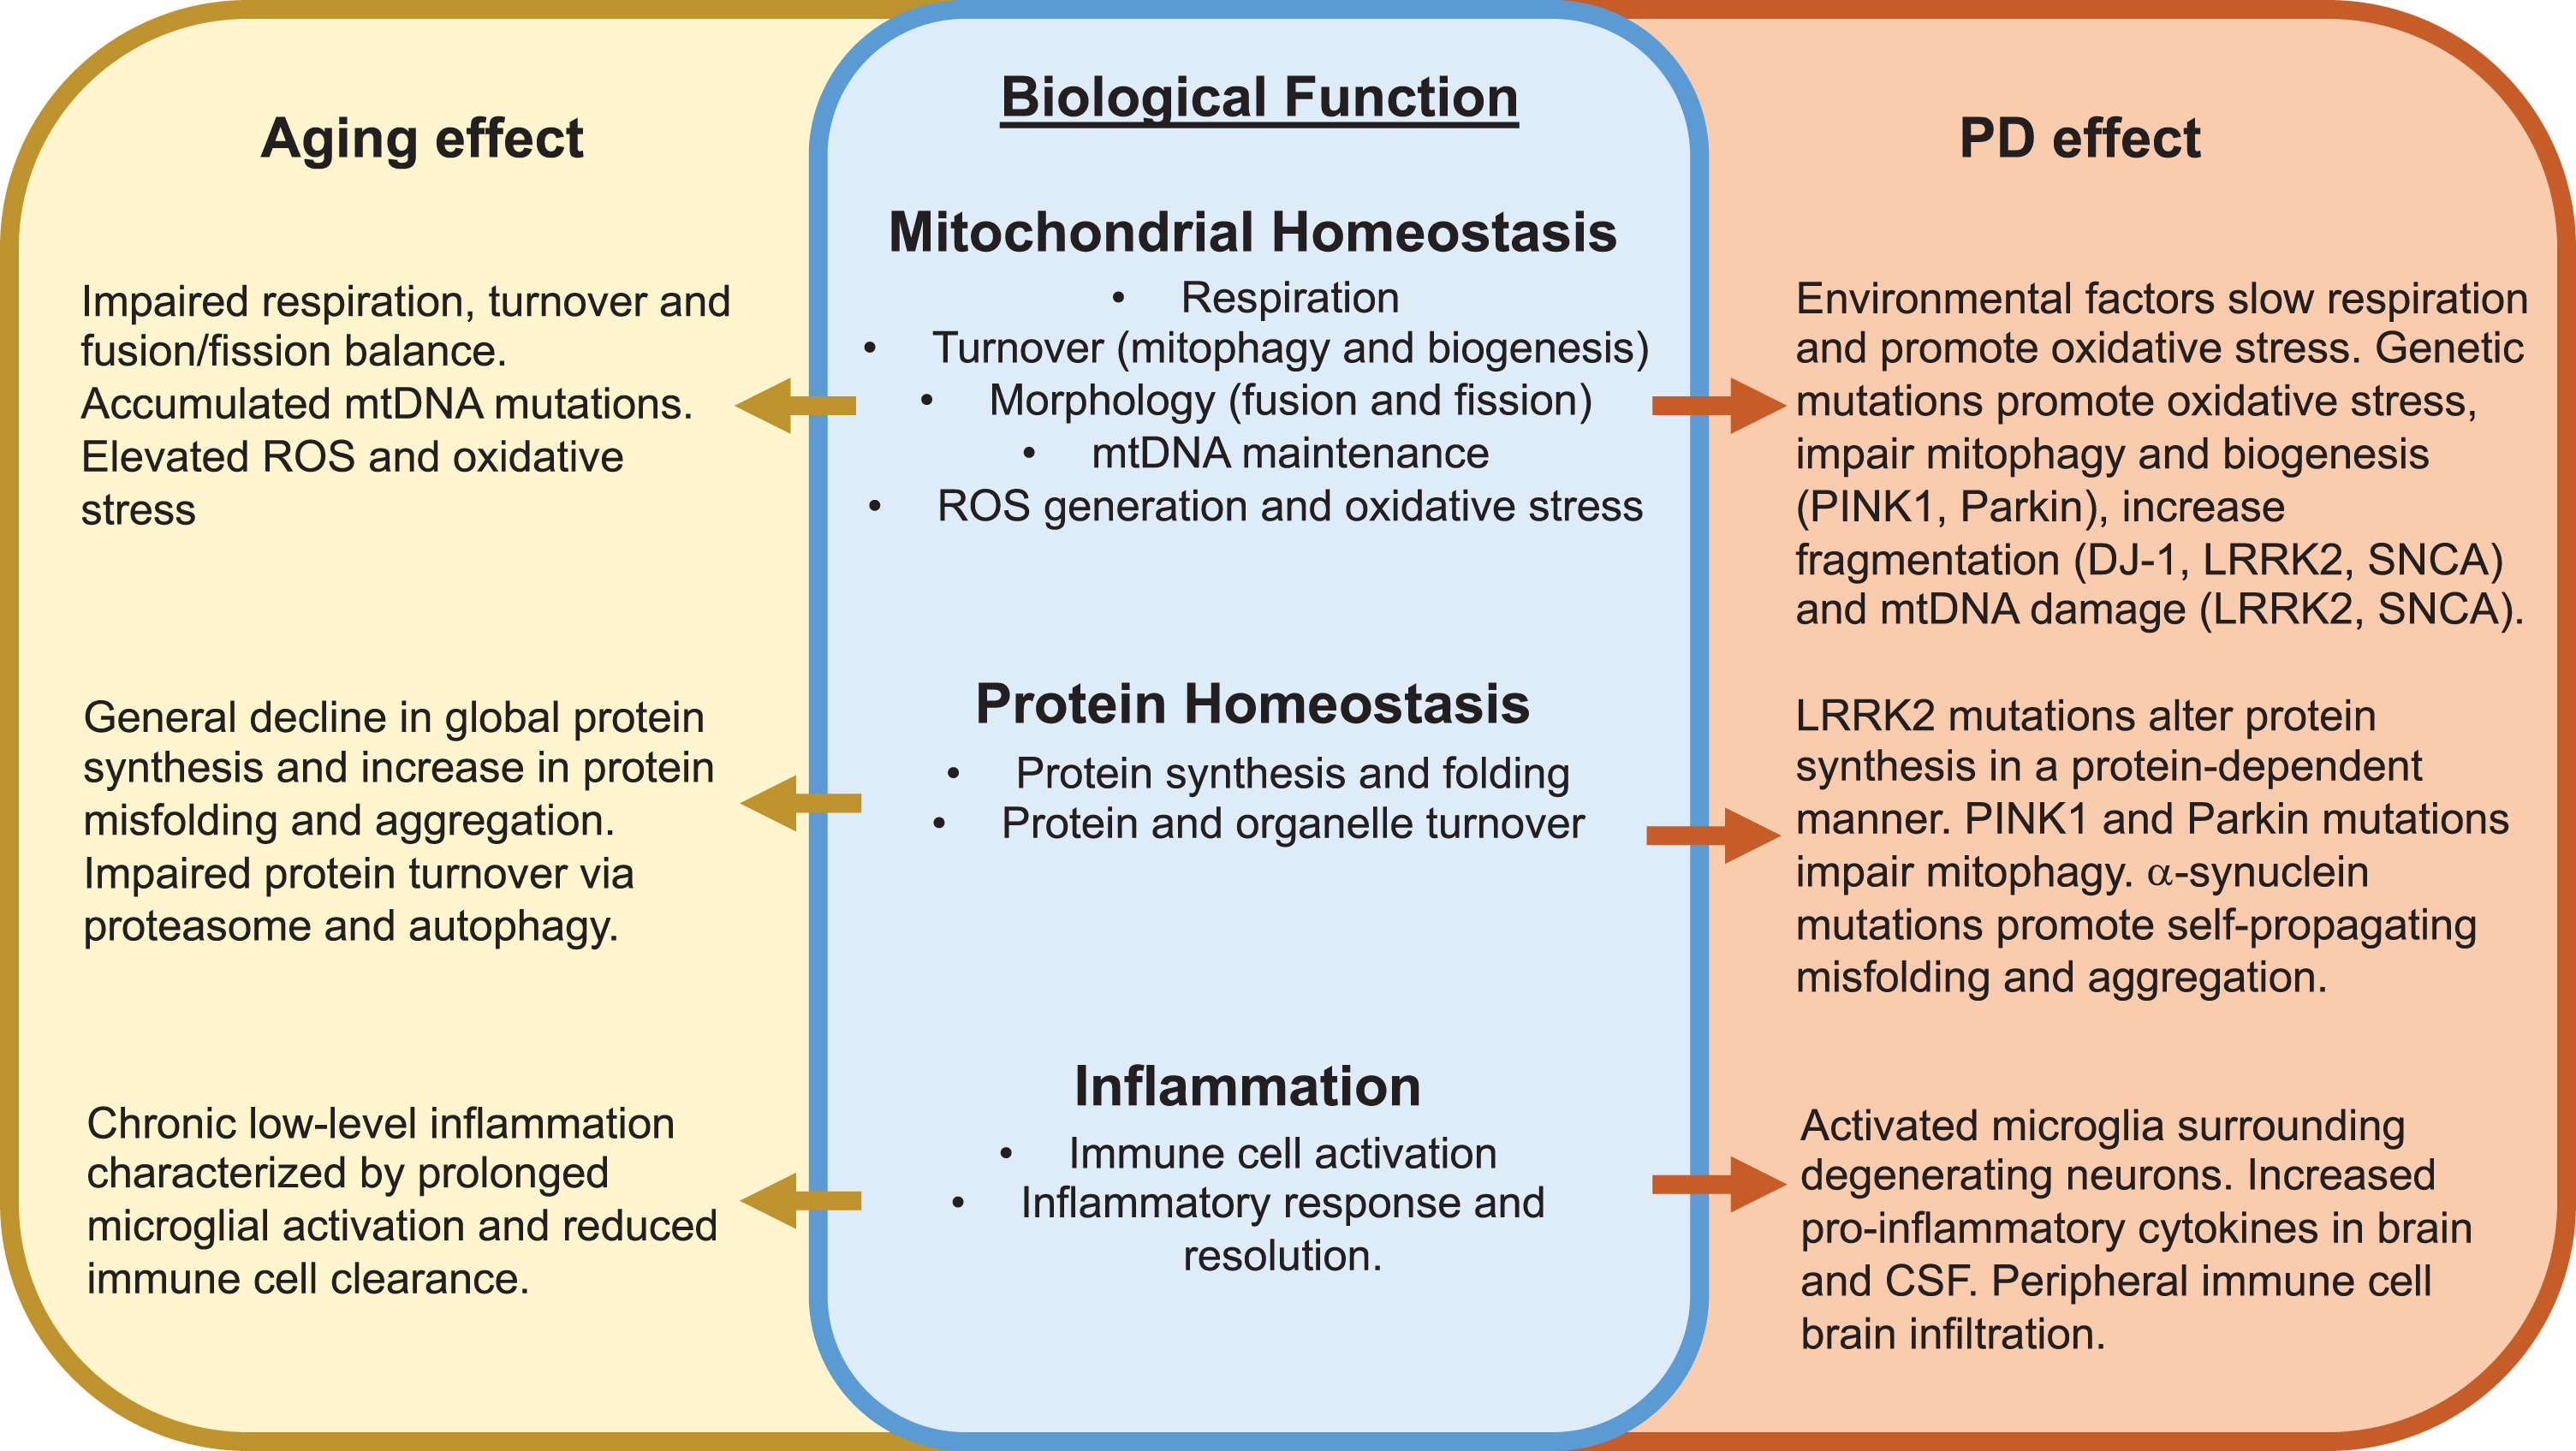 Convergent effects of aging and Parkinson’s disease development on key biological functions. Major overlapping effects of aging and PD on mitochondrial homeostasis, protein homeostasis and inflammation are described. See text for additional details. ROS, reactive oxygen species.